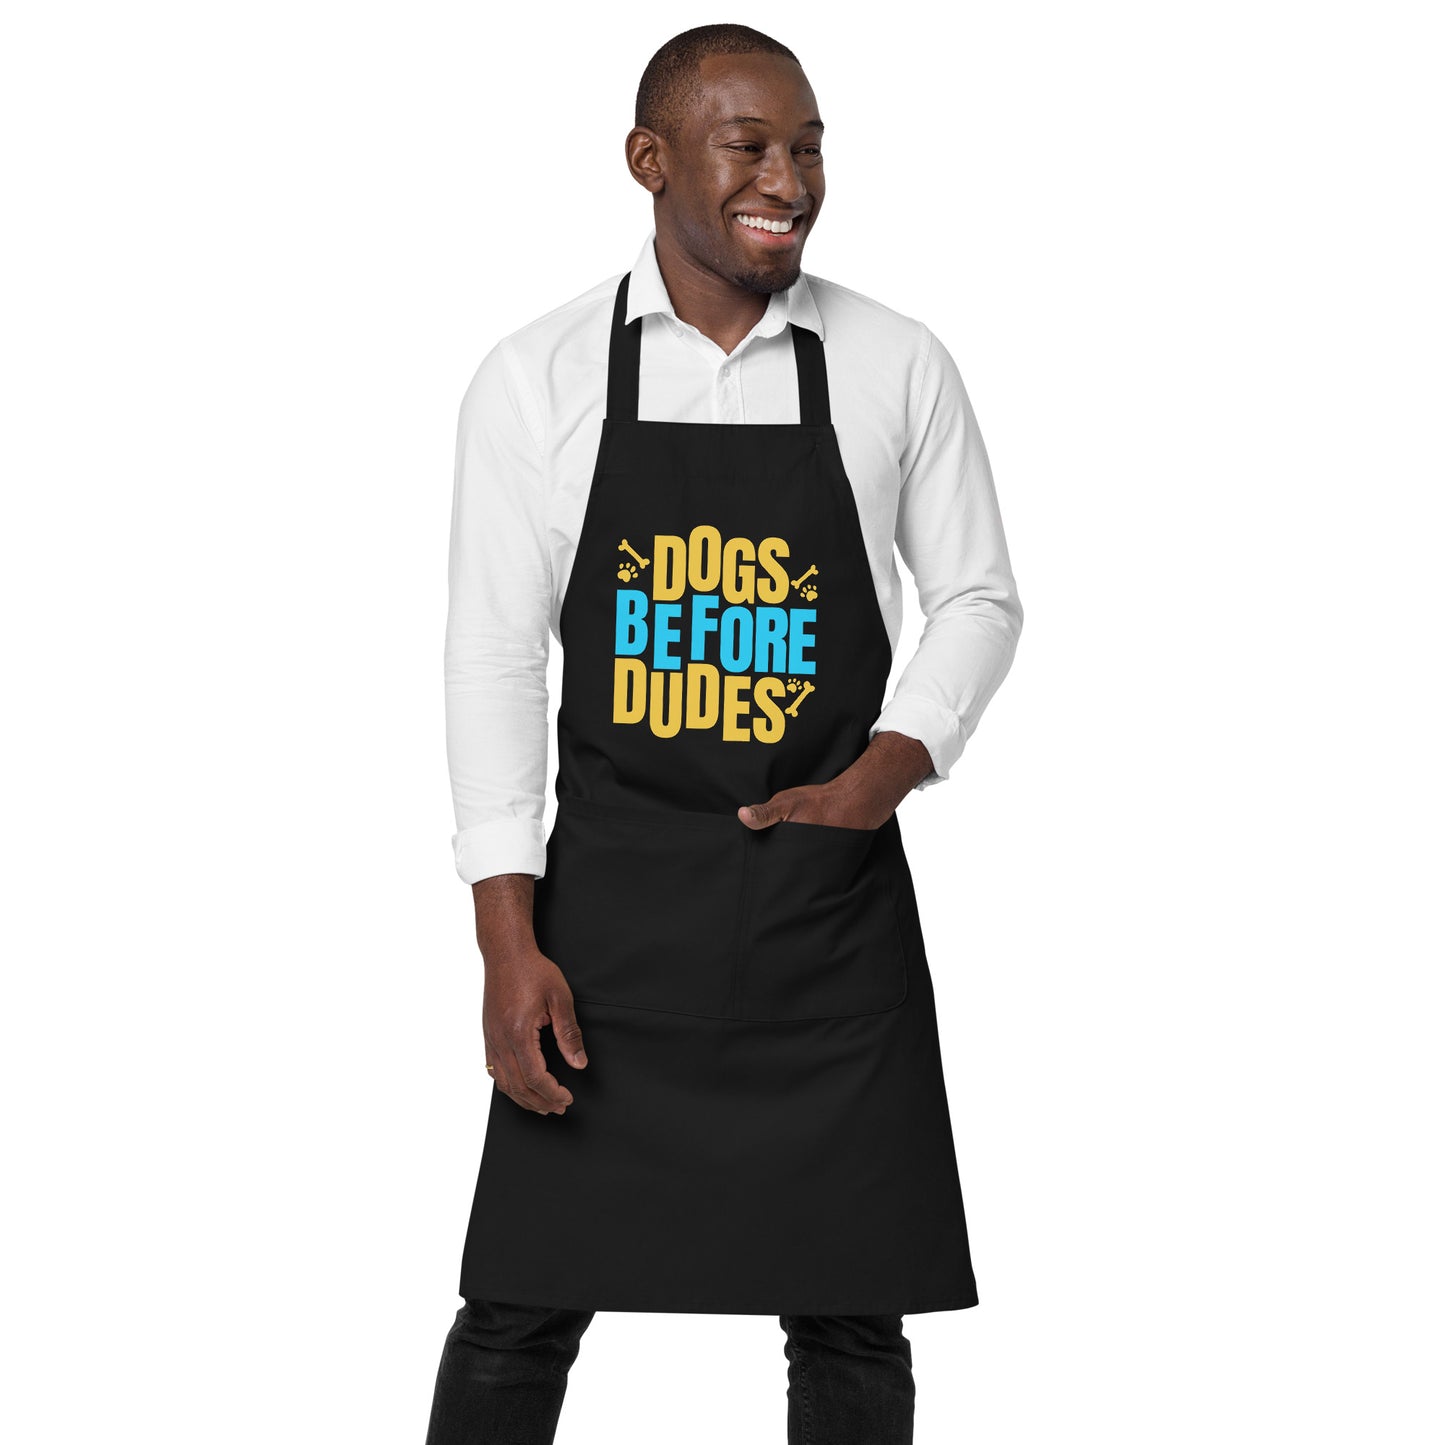 Dogs Before Dudes Organic cotton apron